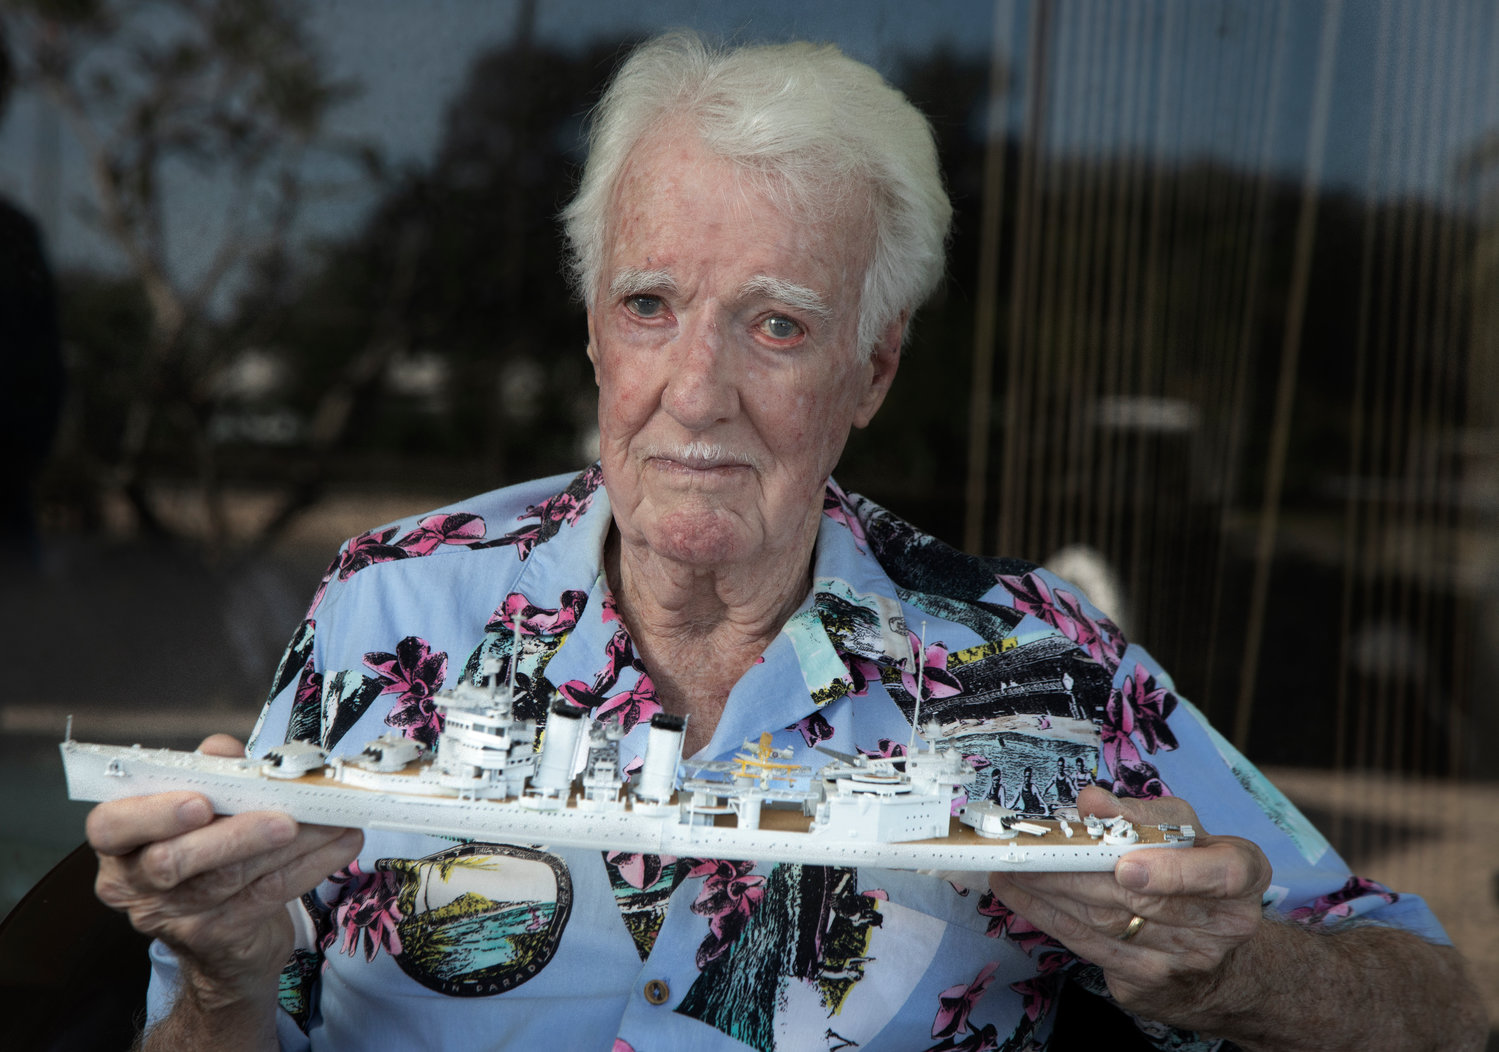 Stephen Cease, 88, holds a model of the USS New Orleans, 1939, in his St. Petersburg home Wednesday, November 17, 2021. Cease was 8 years old when he witnessed the bombing of Pearl Harbor. The USS New Orleans was one of the ships at Pearl Harbor at the time.